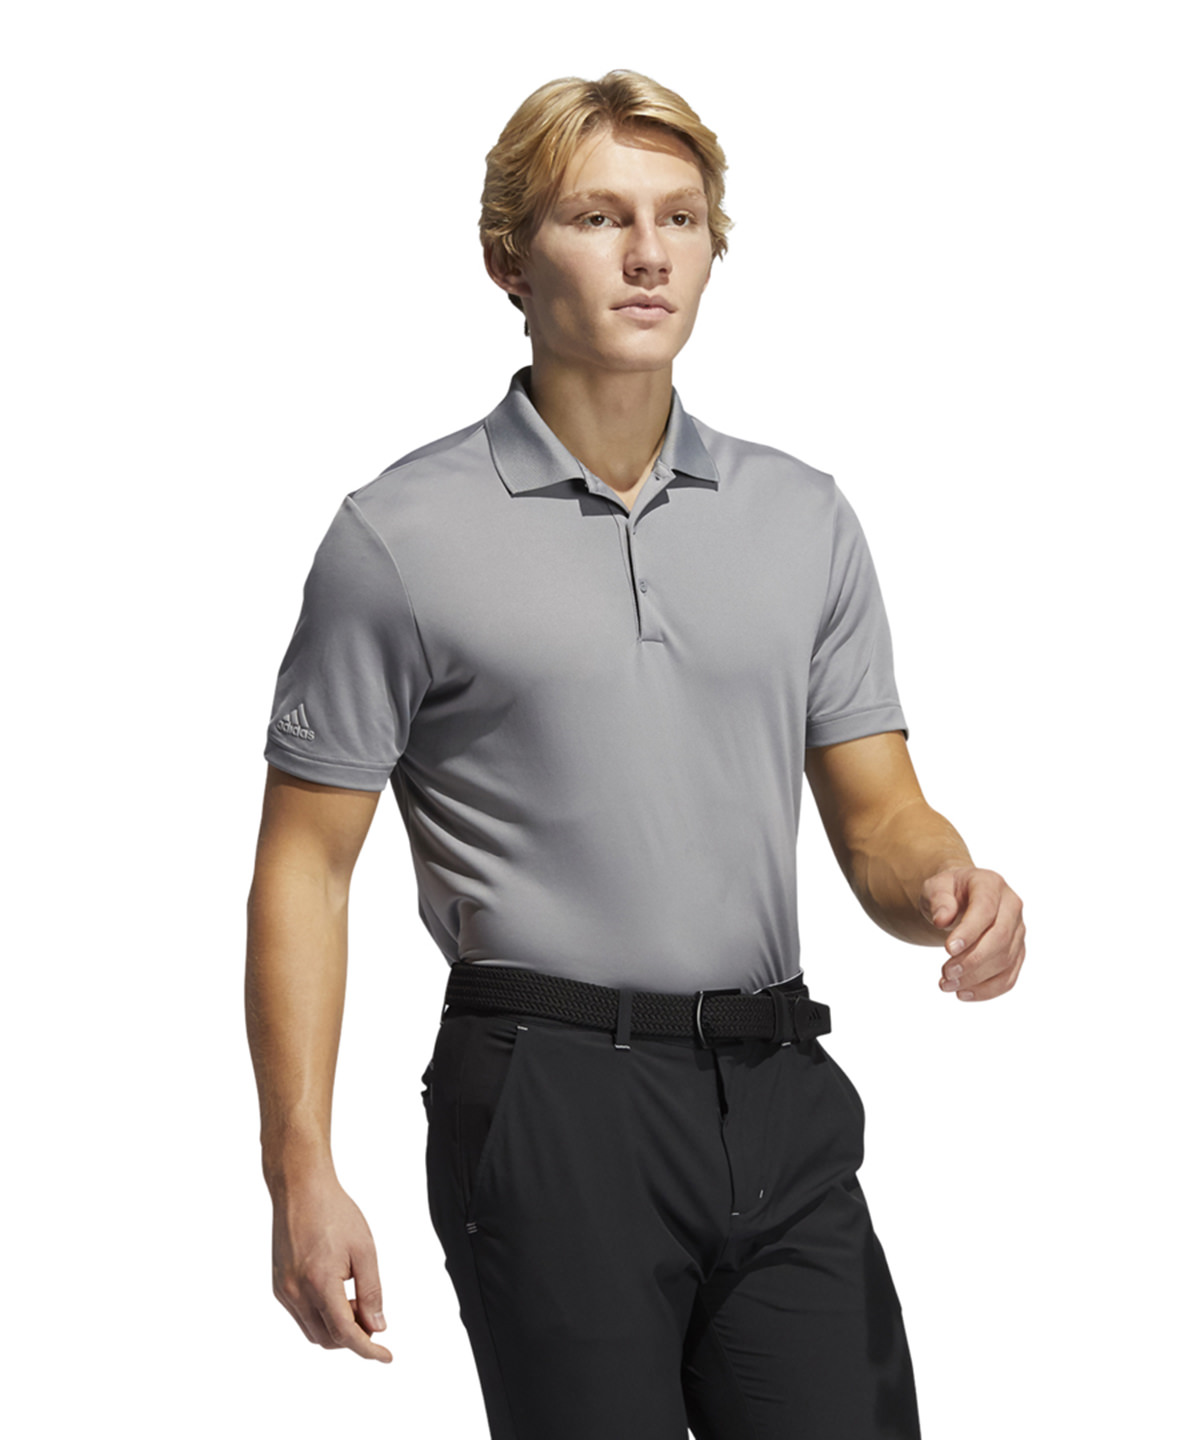 AD001 adidas® Performance polo - Absolute PPE Industrial